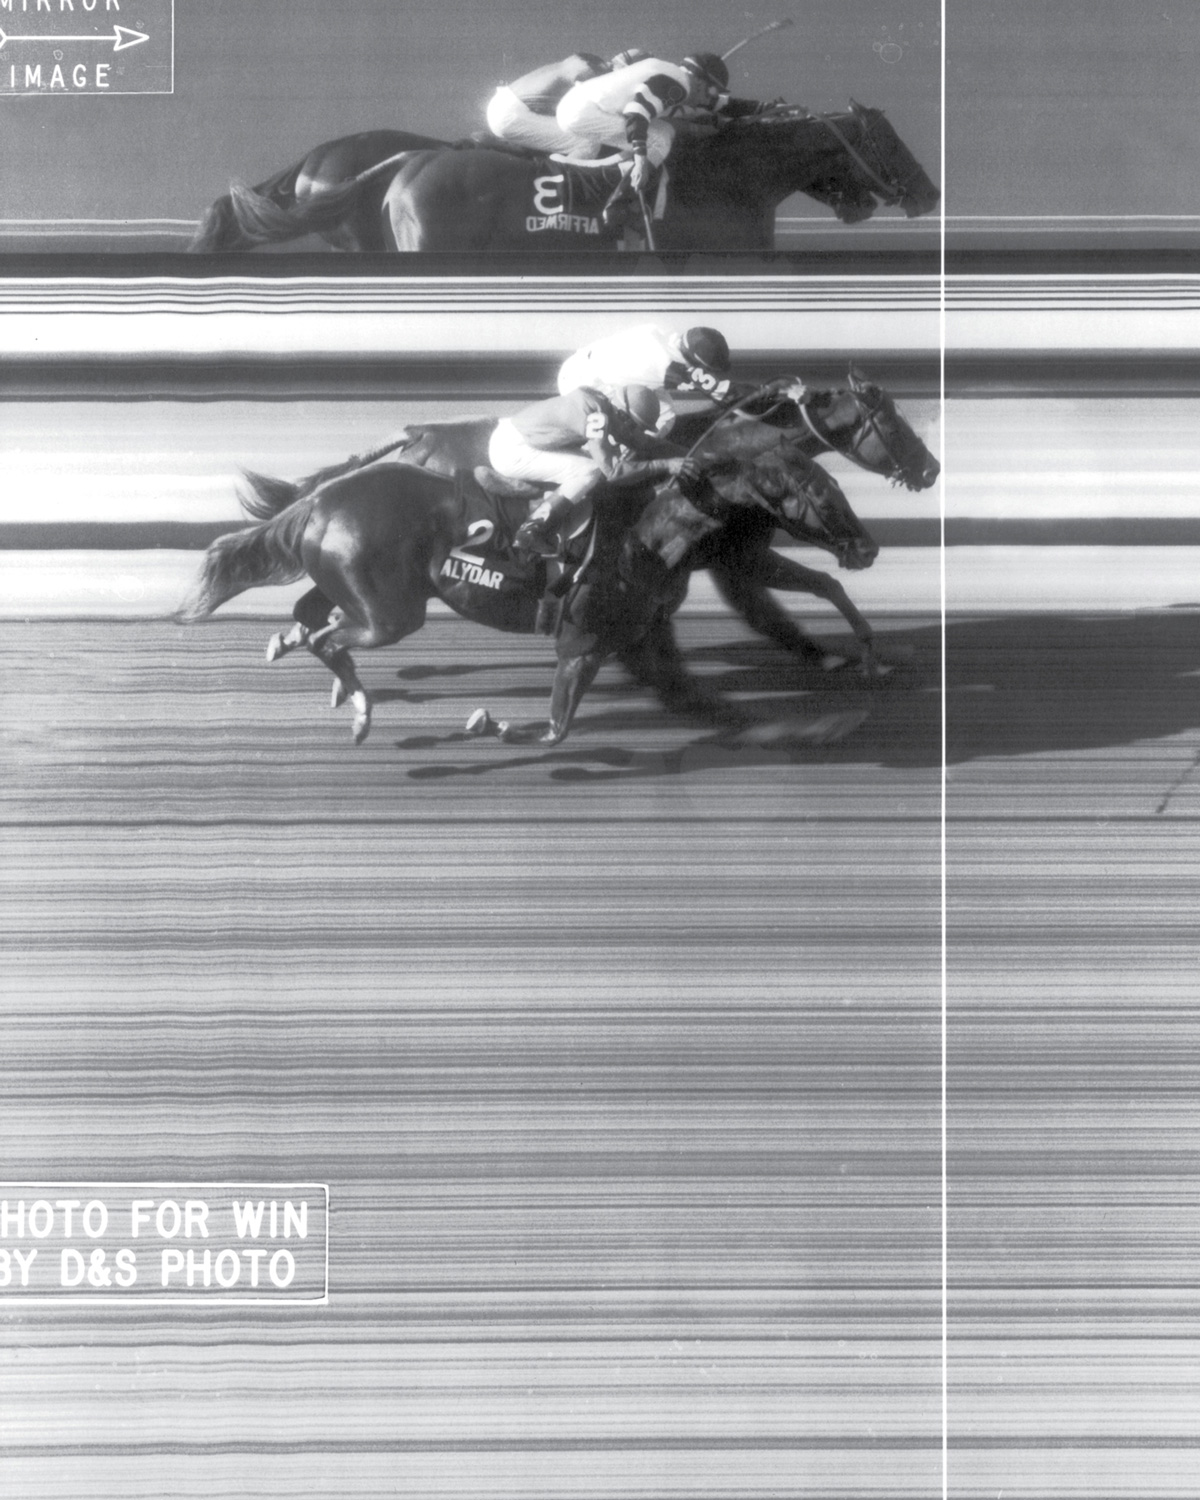 A photograph showing the tight finish between Alydar and Affirmed at the 110th Belmont Stakes, 10 June nineteen seventy eight. 